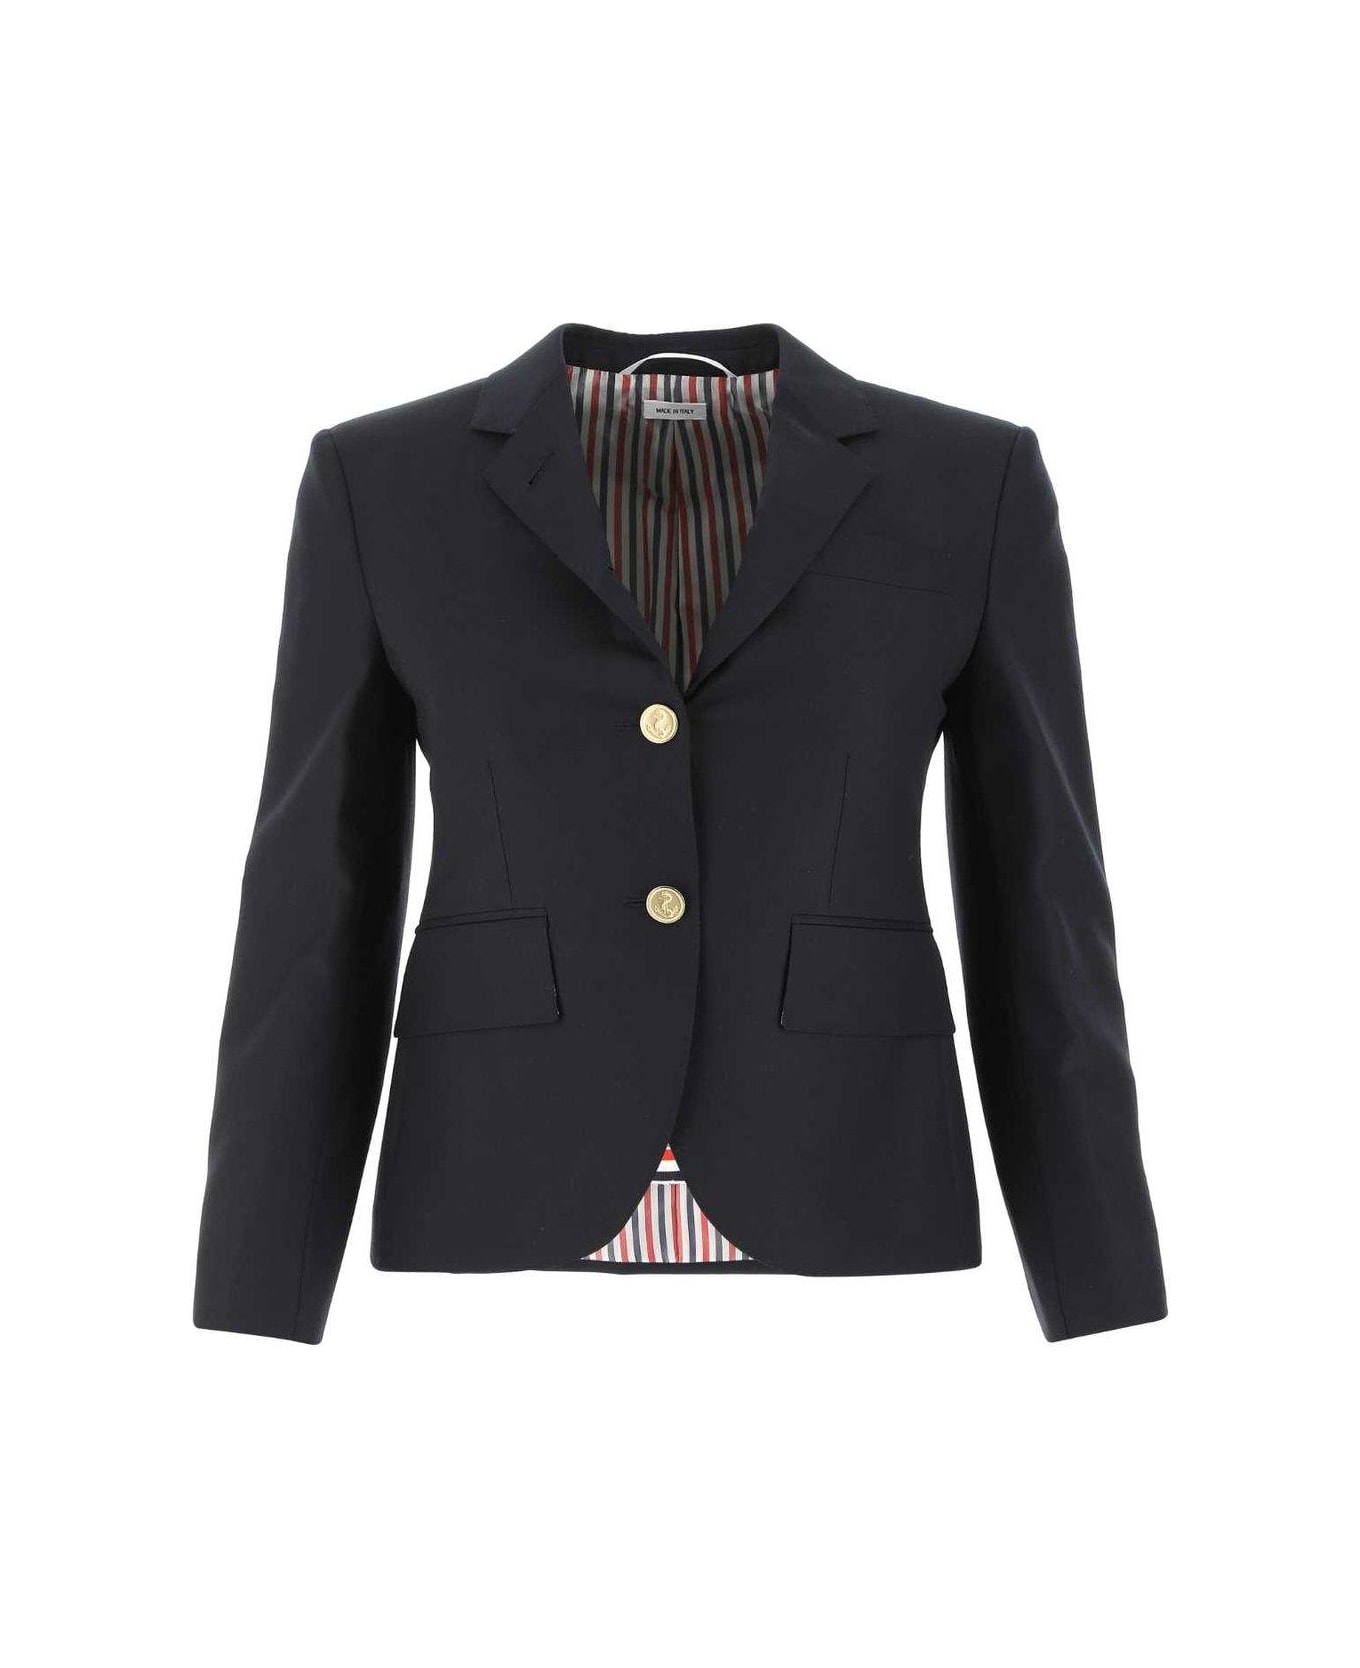 Thom Browne Single-breasted Tailored Blazer - Navy ブレザー